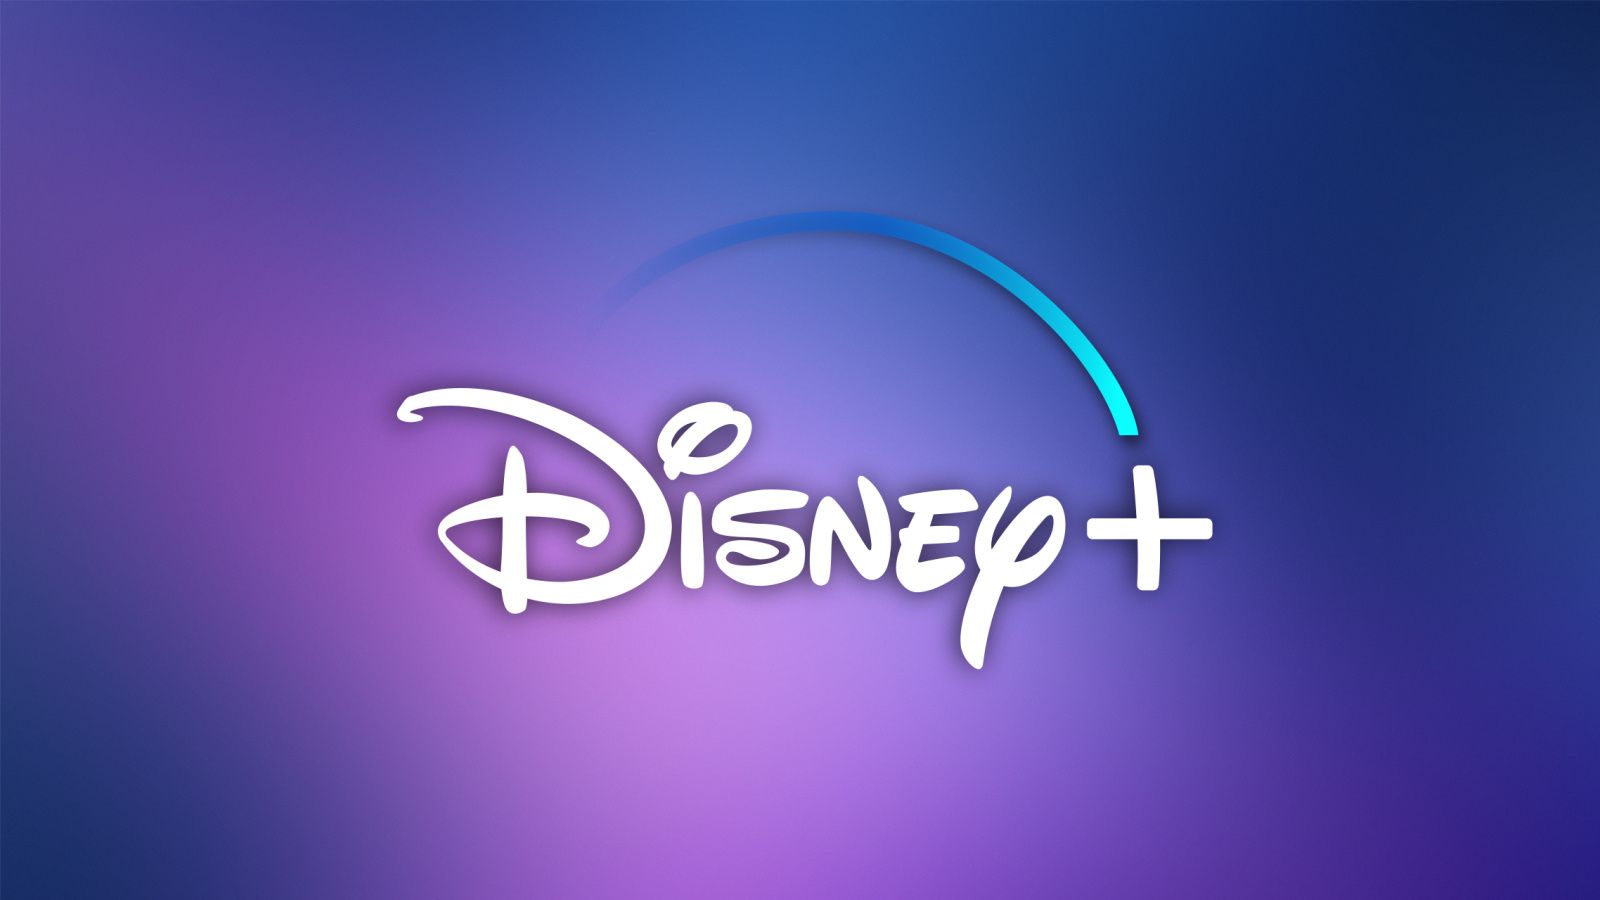 Disney Confirms Disney+ For South Africa and 42 Other Countries in 2022